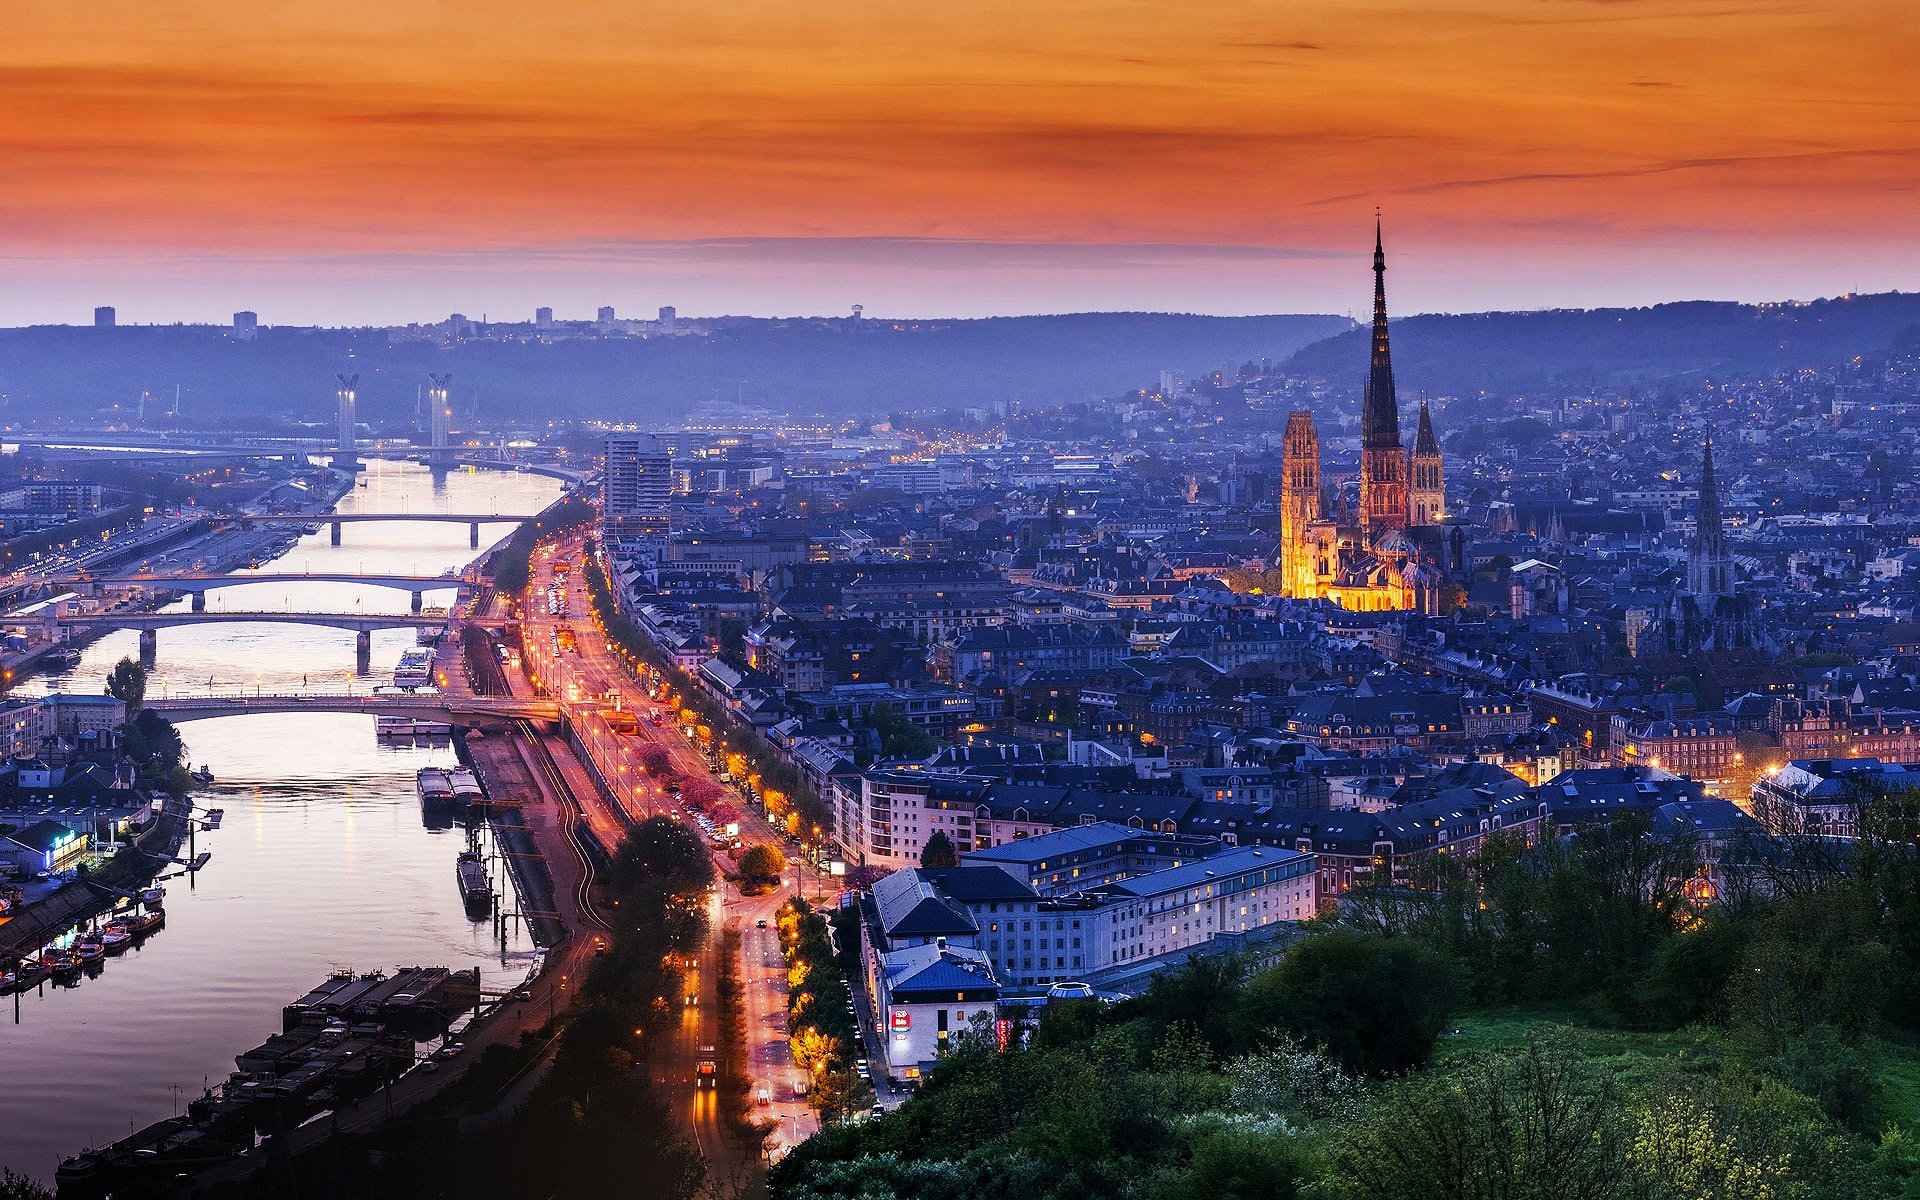 rouen, France, Normandy, Cathedral, House, Road, Light, Sunset, Evening, Trees, River, Water, Landscape, City, Bridge Wallpaper